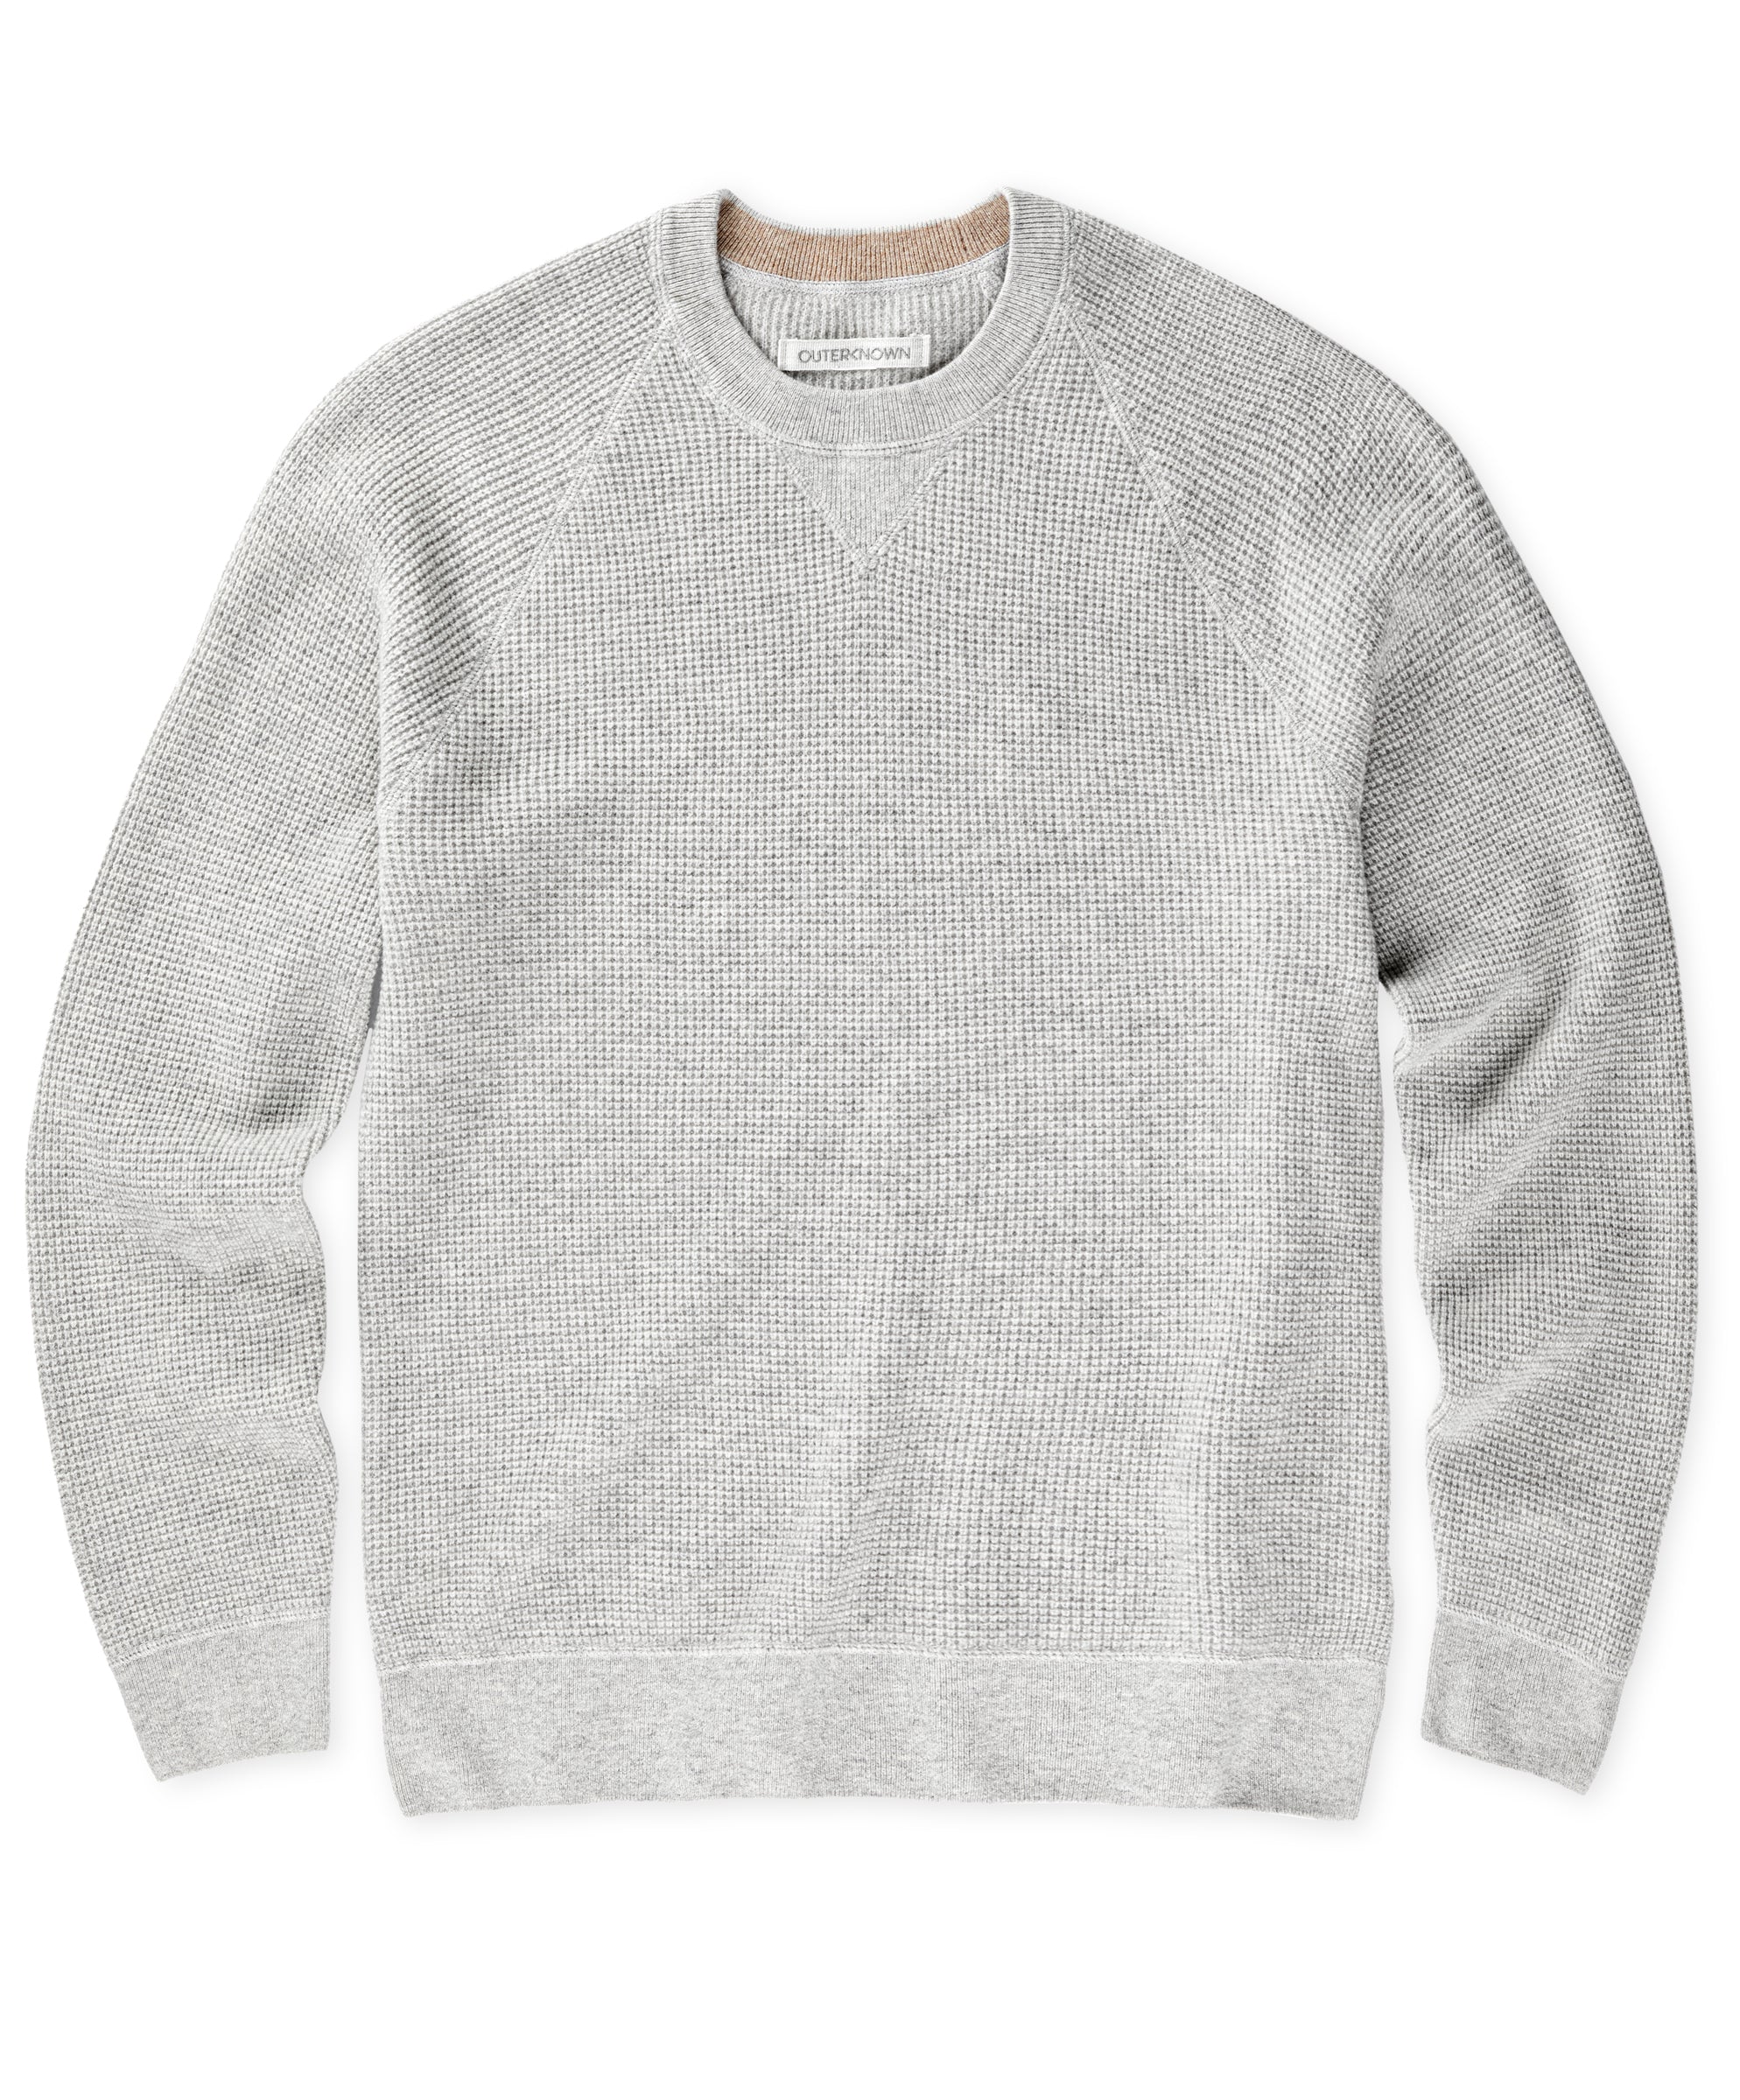 Shelter Waffle Crew | Men's Sweaters | Outerknown